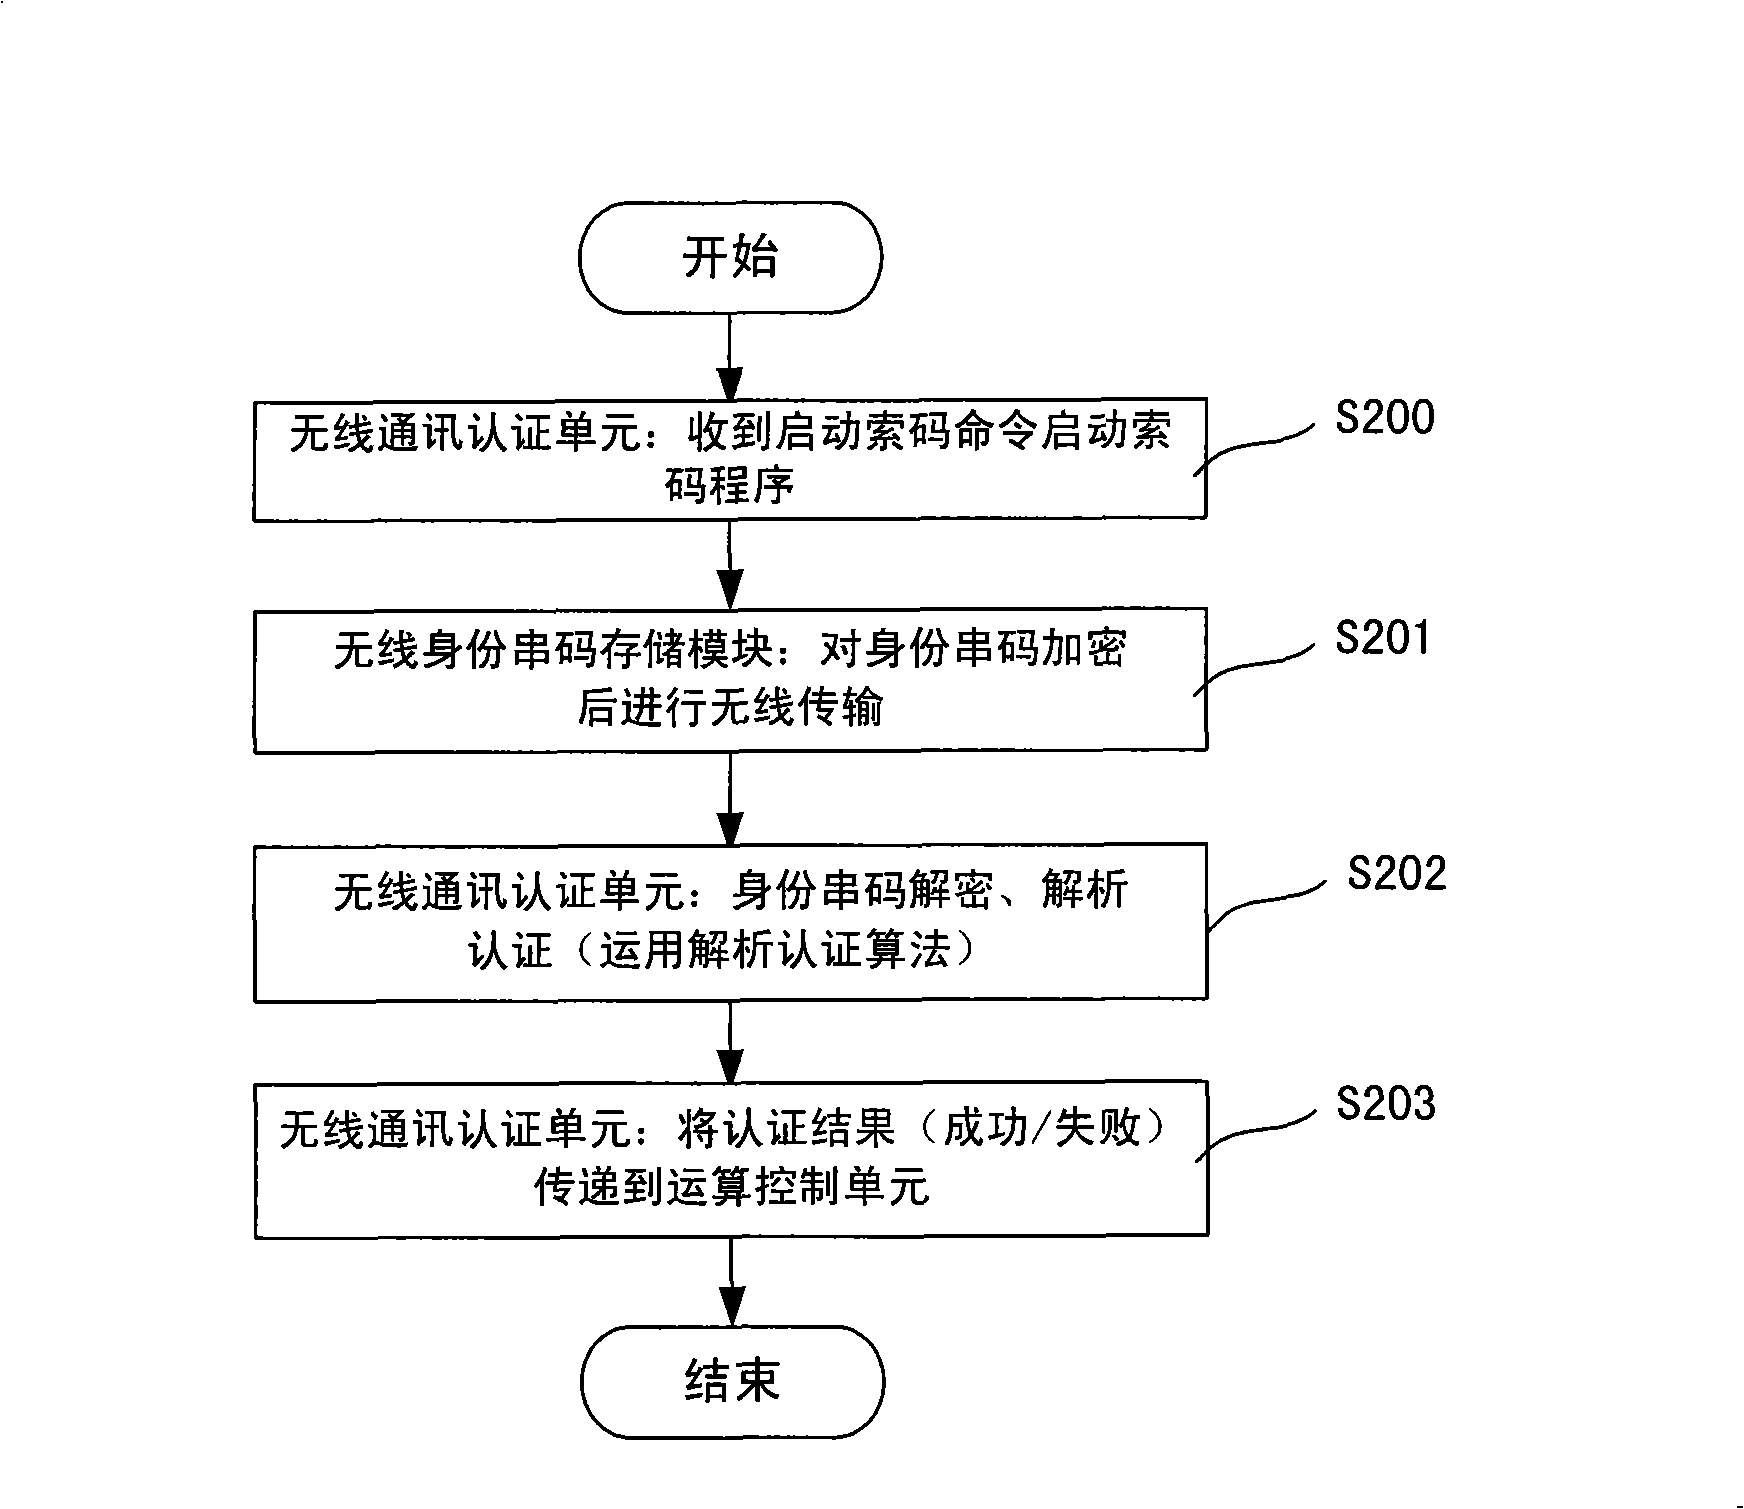 Parking position controller and parking position management system based on personal identity string code authentication